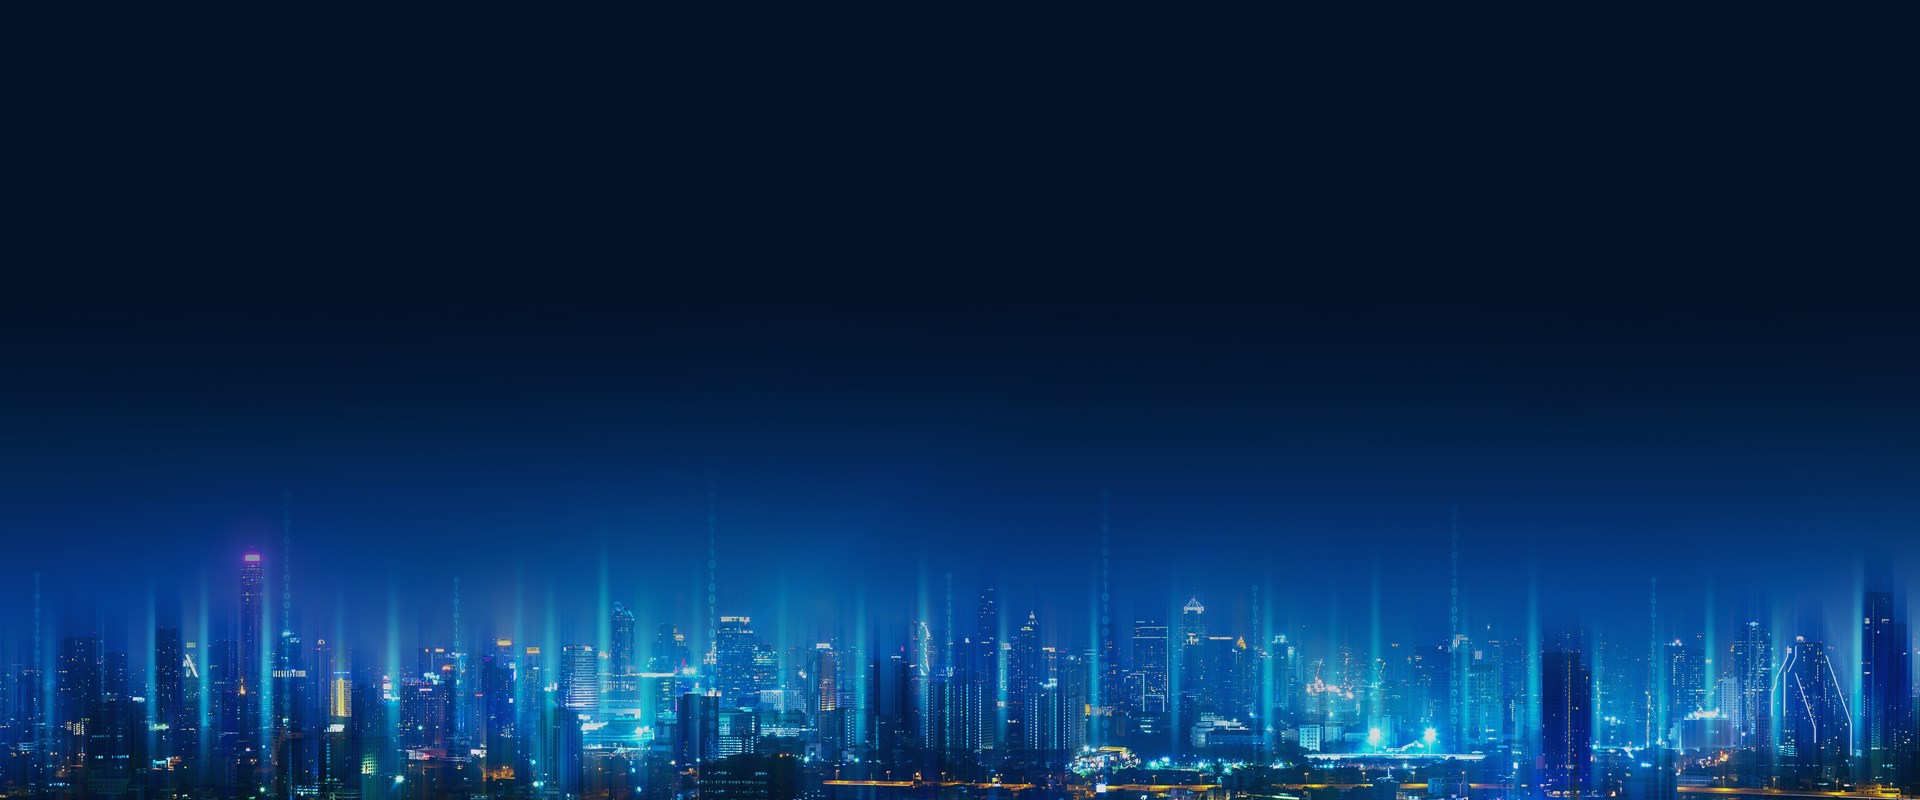 An image of a city skyline with data lights rising in to the sky at night